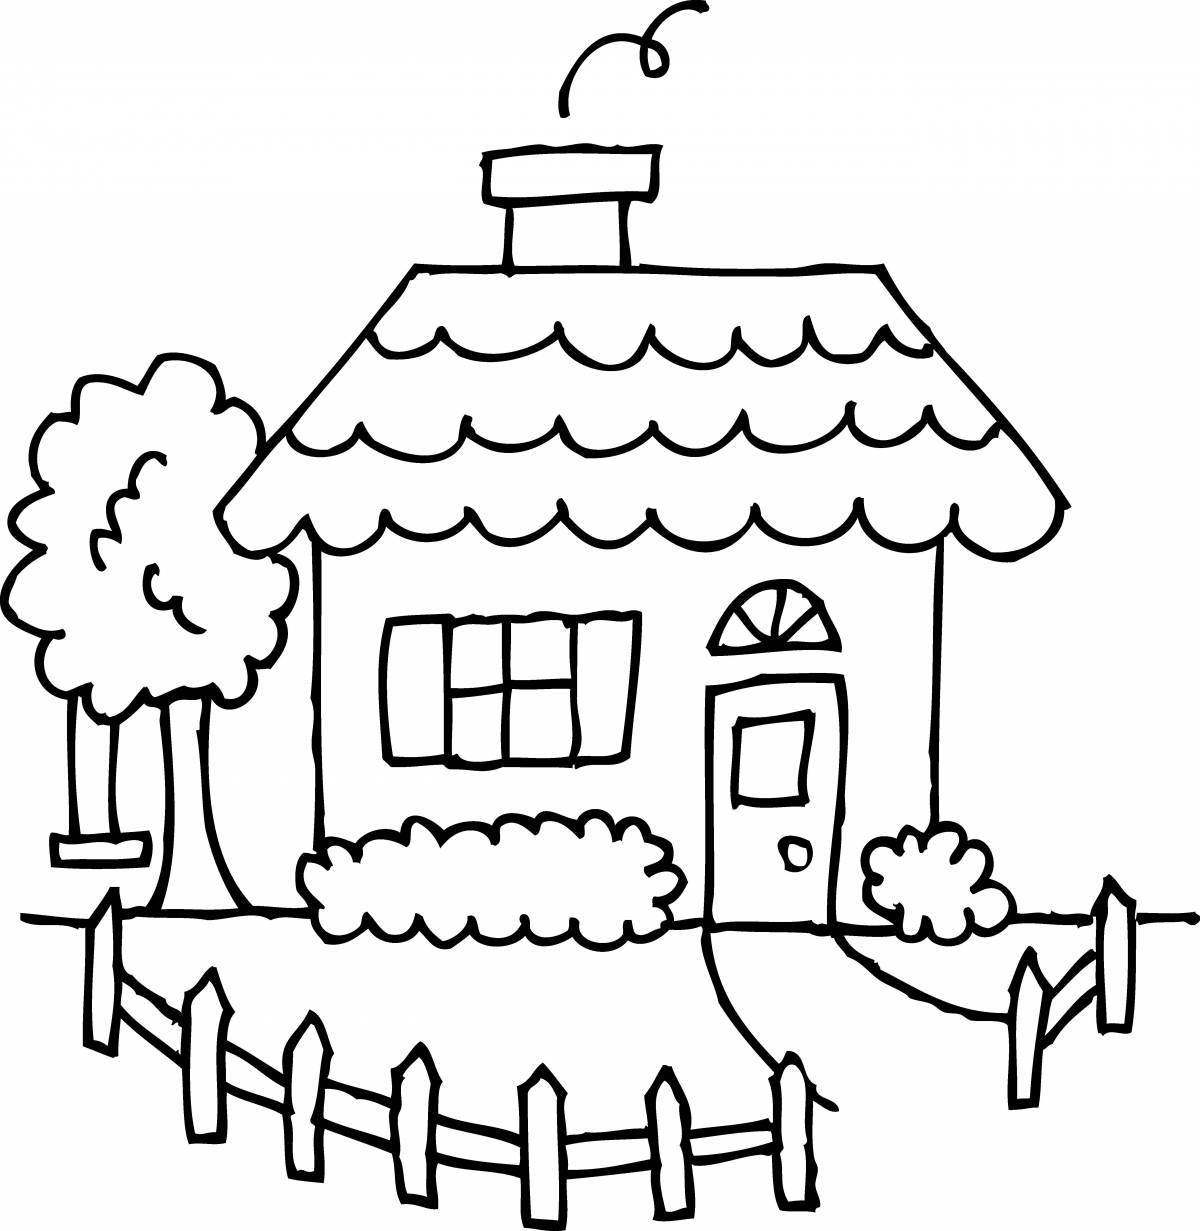 Playful house coloring book for kids